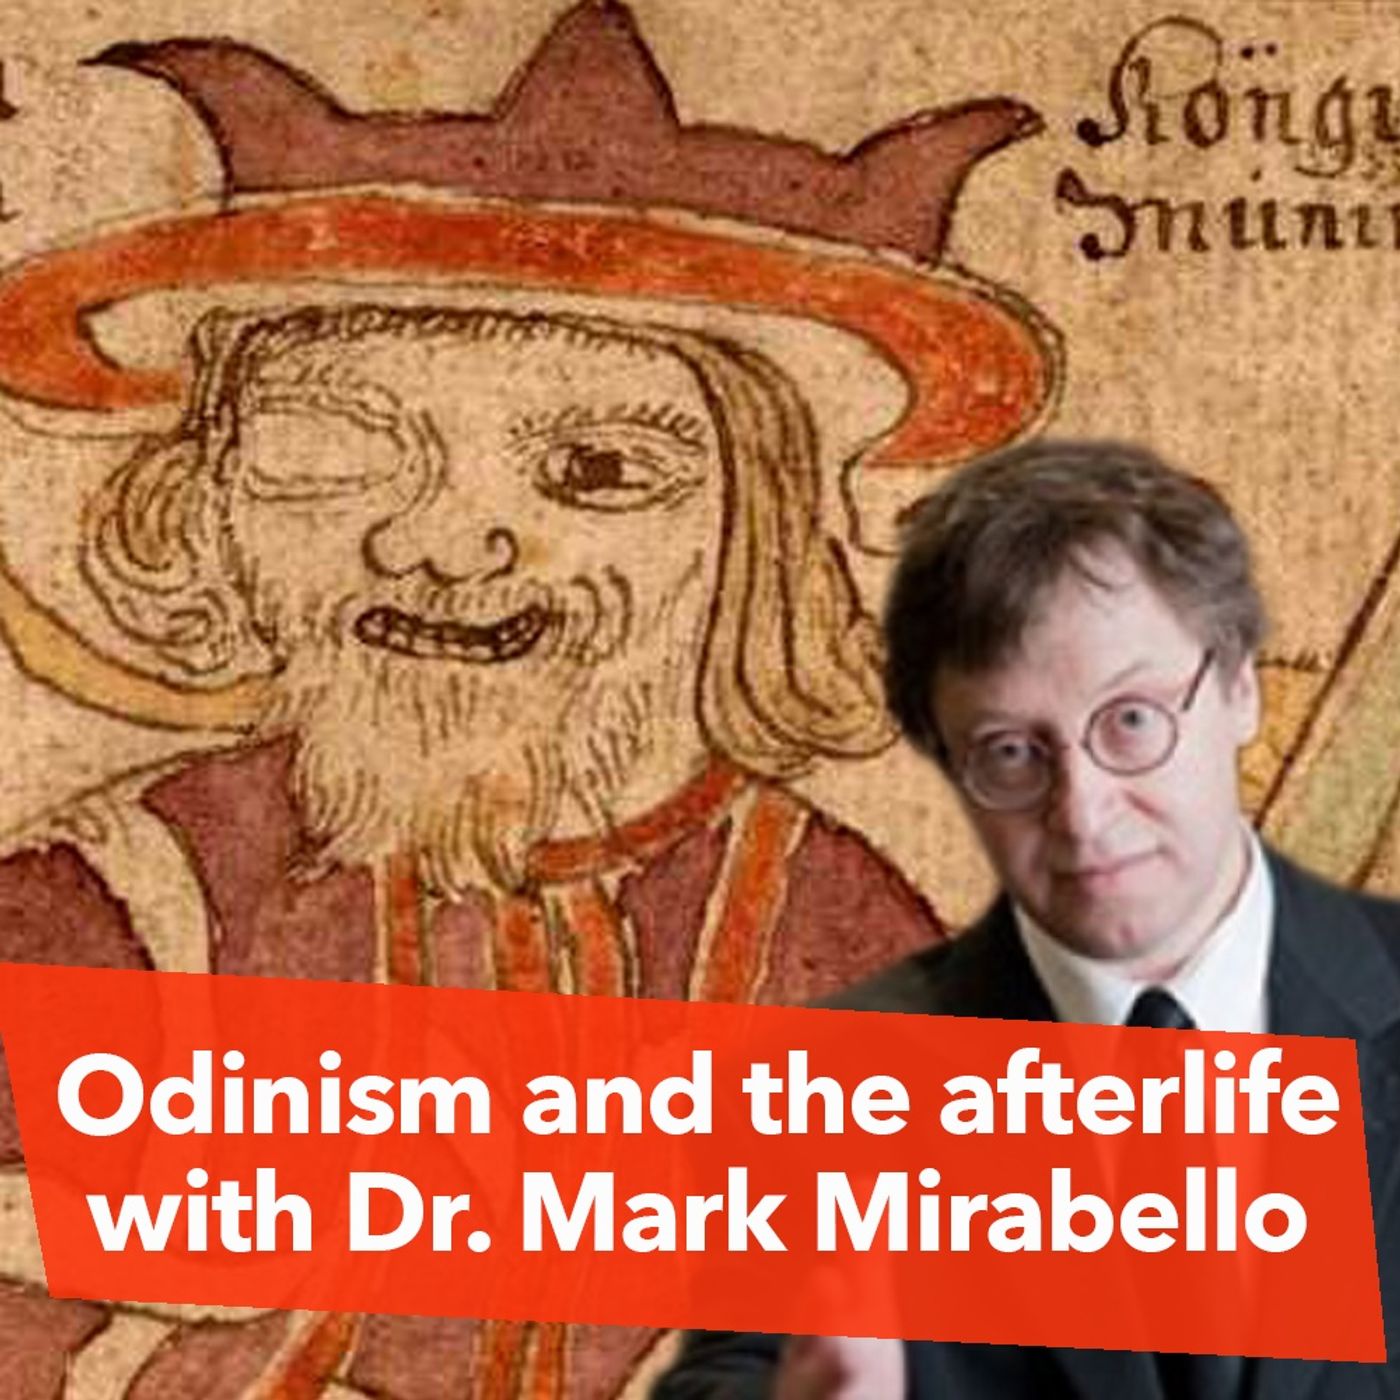 The Afterlife and the secret Odin Brotherhood with Dr. Mark Mirabello